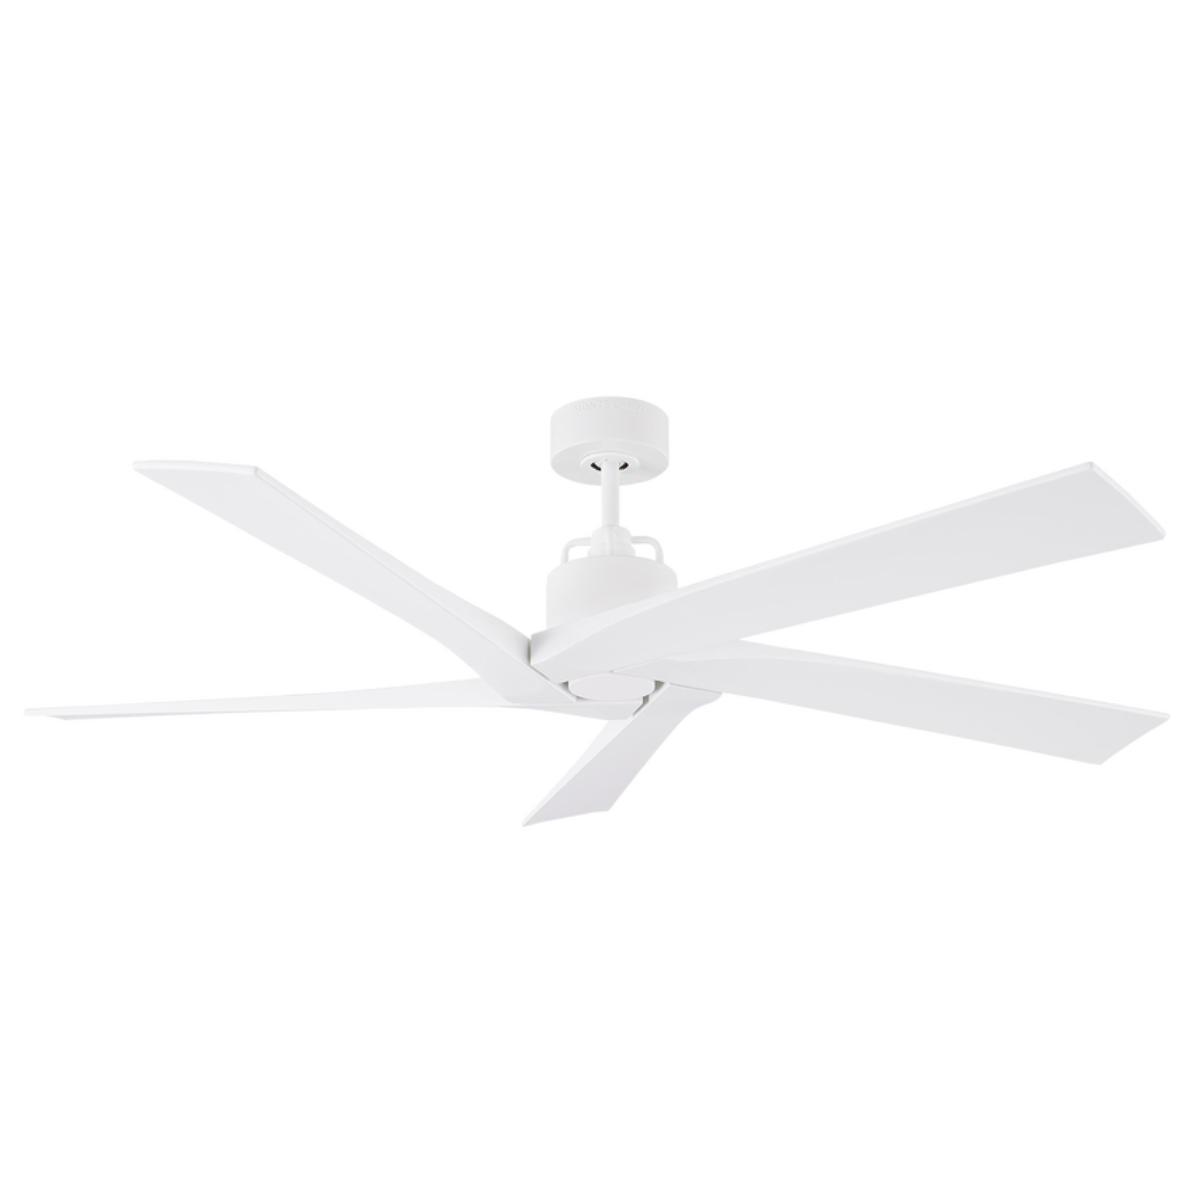 Aspen 56 Inch Ceiling Fan with Remote, Matte White Finish - Bees Lighting